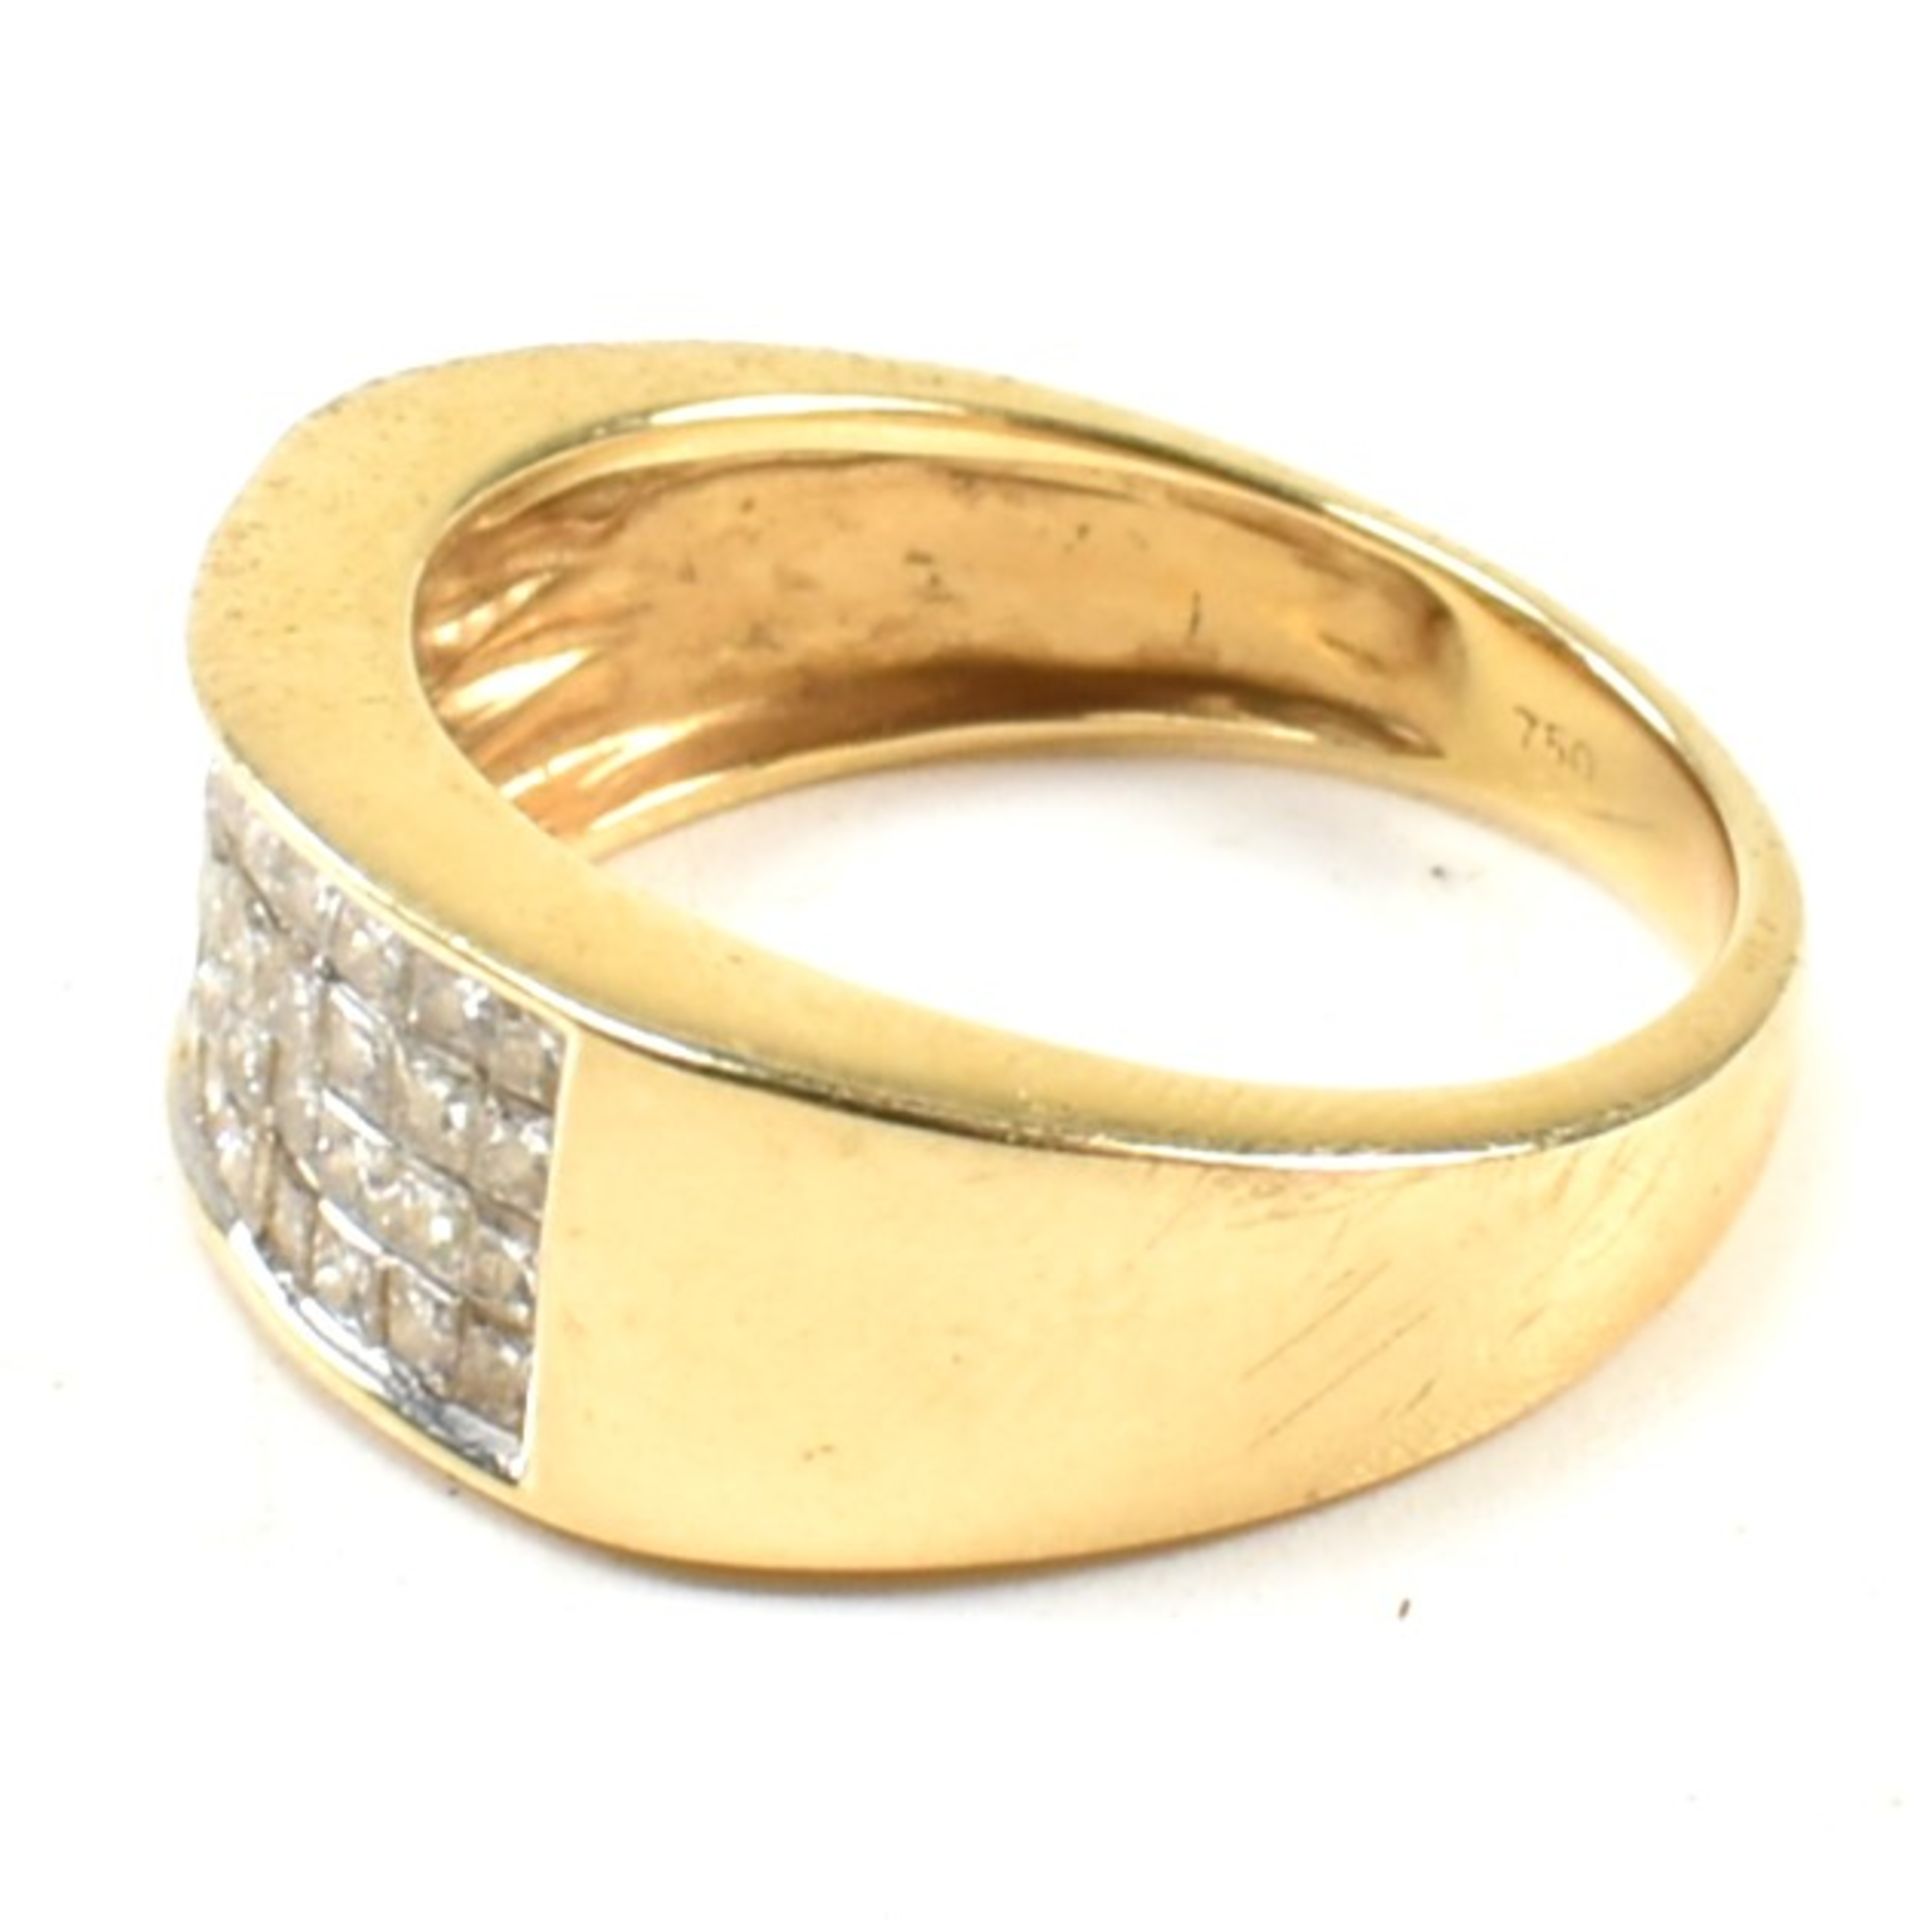 18CT GOLD & DIAMOND CLUSTER RING - Image 3 of 7